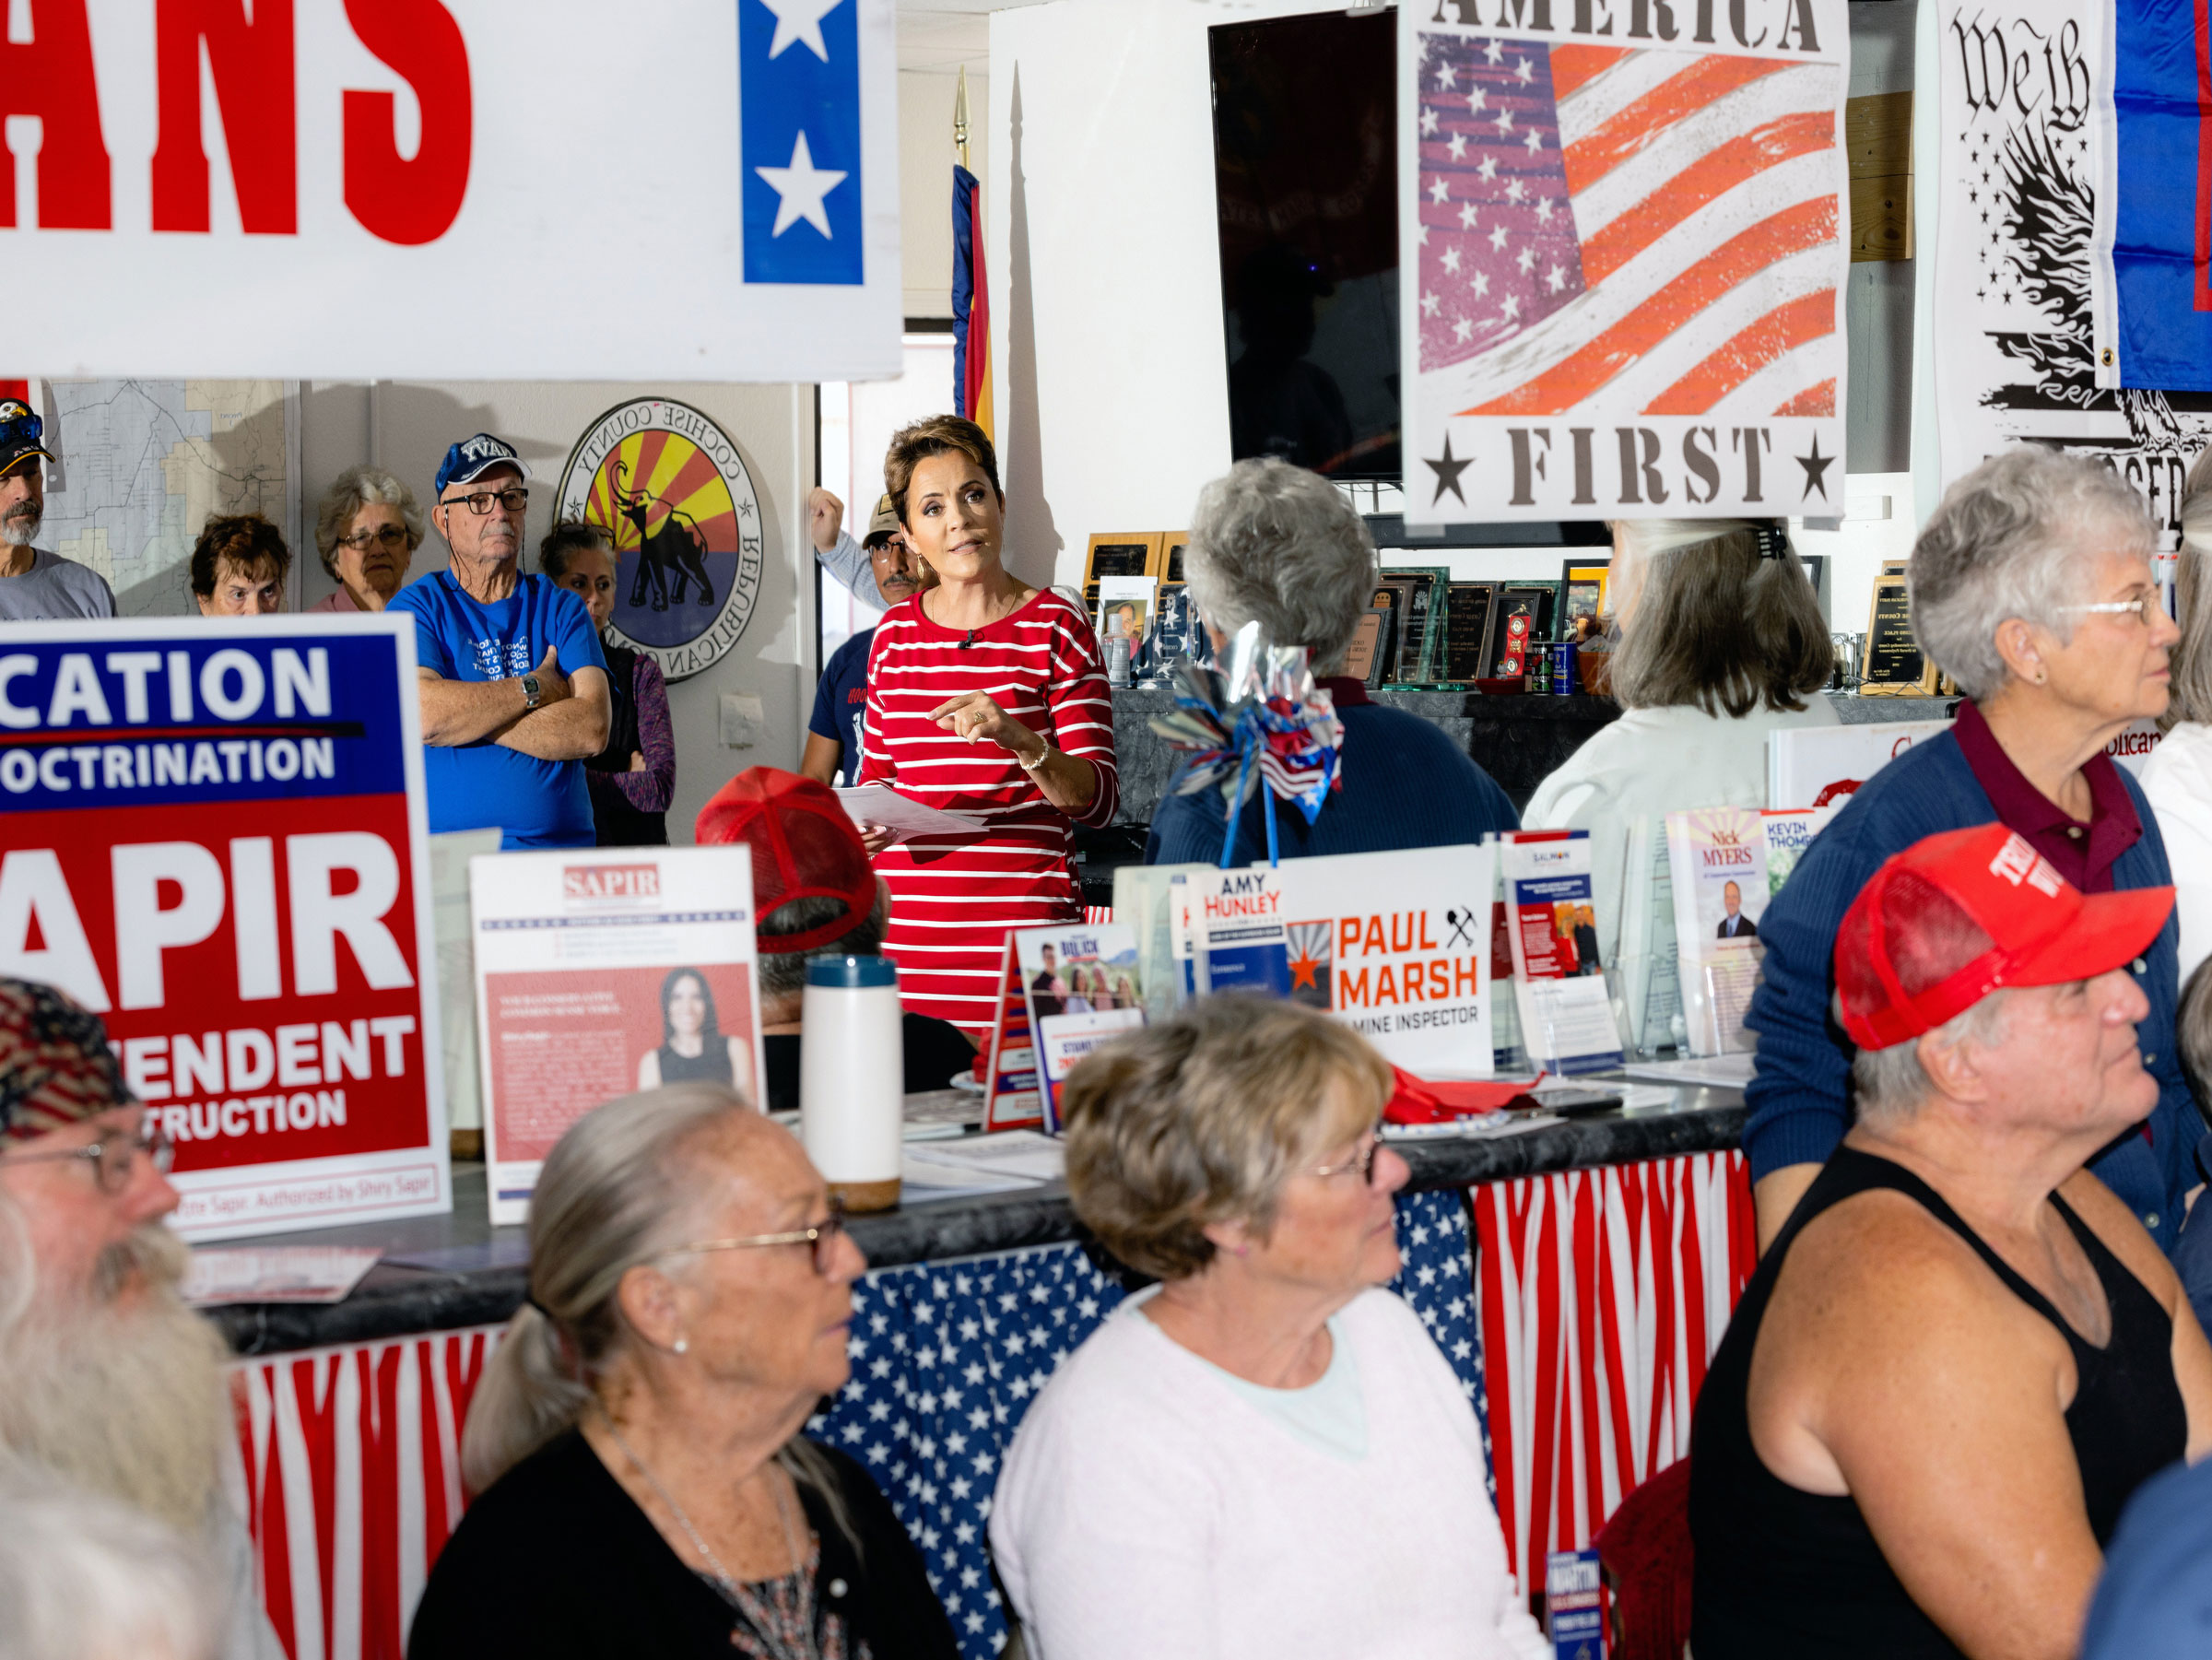 Kari Lake, a Republican running for governor of Arizona, answers questions at a campaign event in Sierra Vista, in Arizona's Cochise County, on March 31, 2022. (Cassidy Araiza/The New York Times)